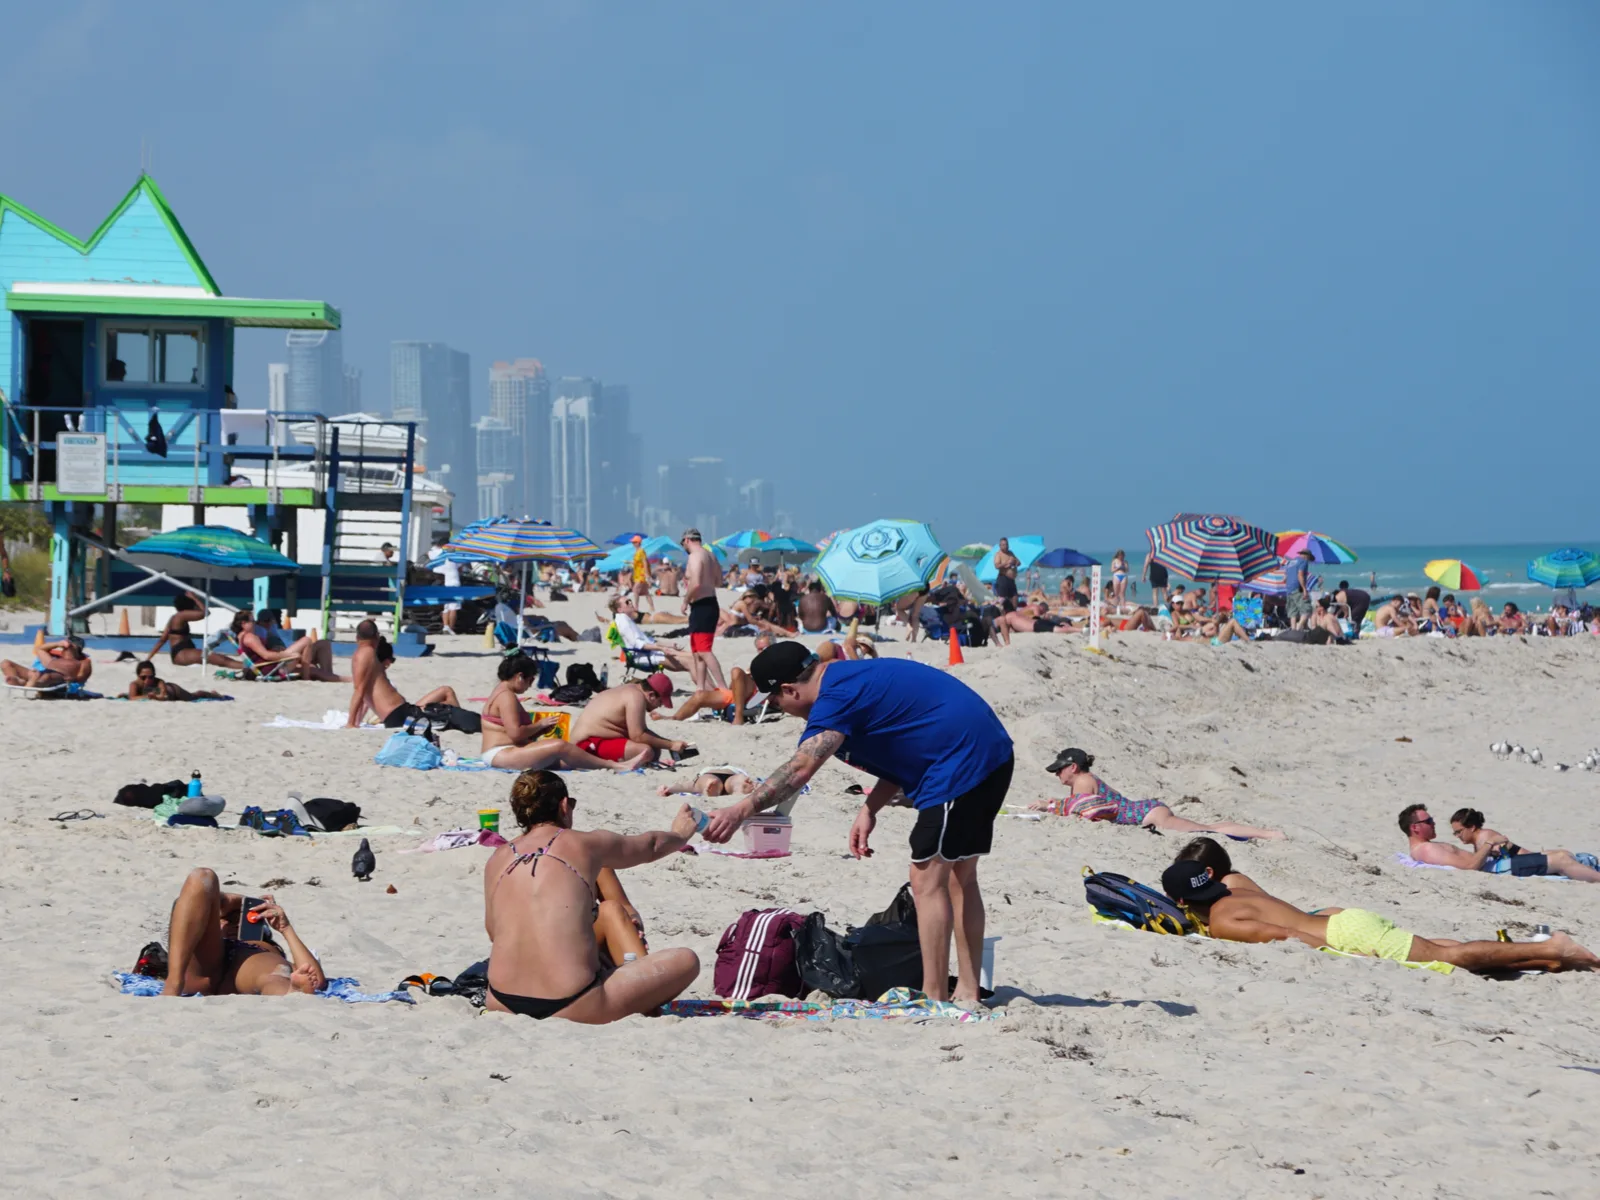 Visitors on a crowded Miami beach on a hot day for a piece on the best beaches on the East Coast